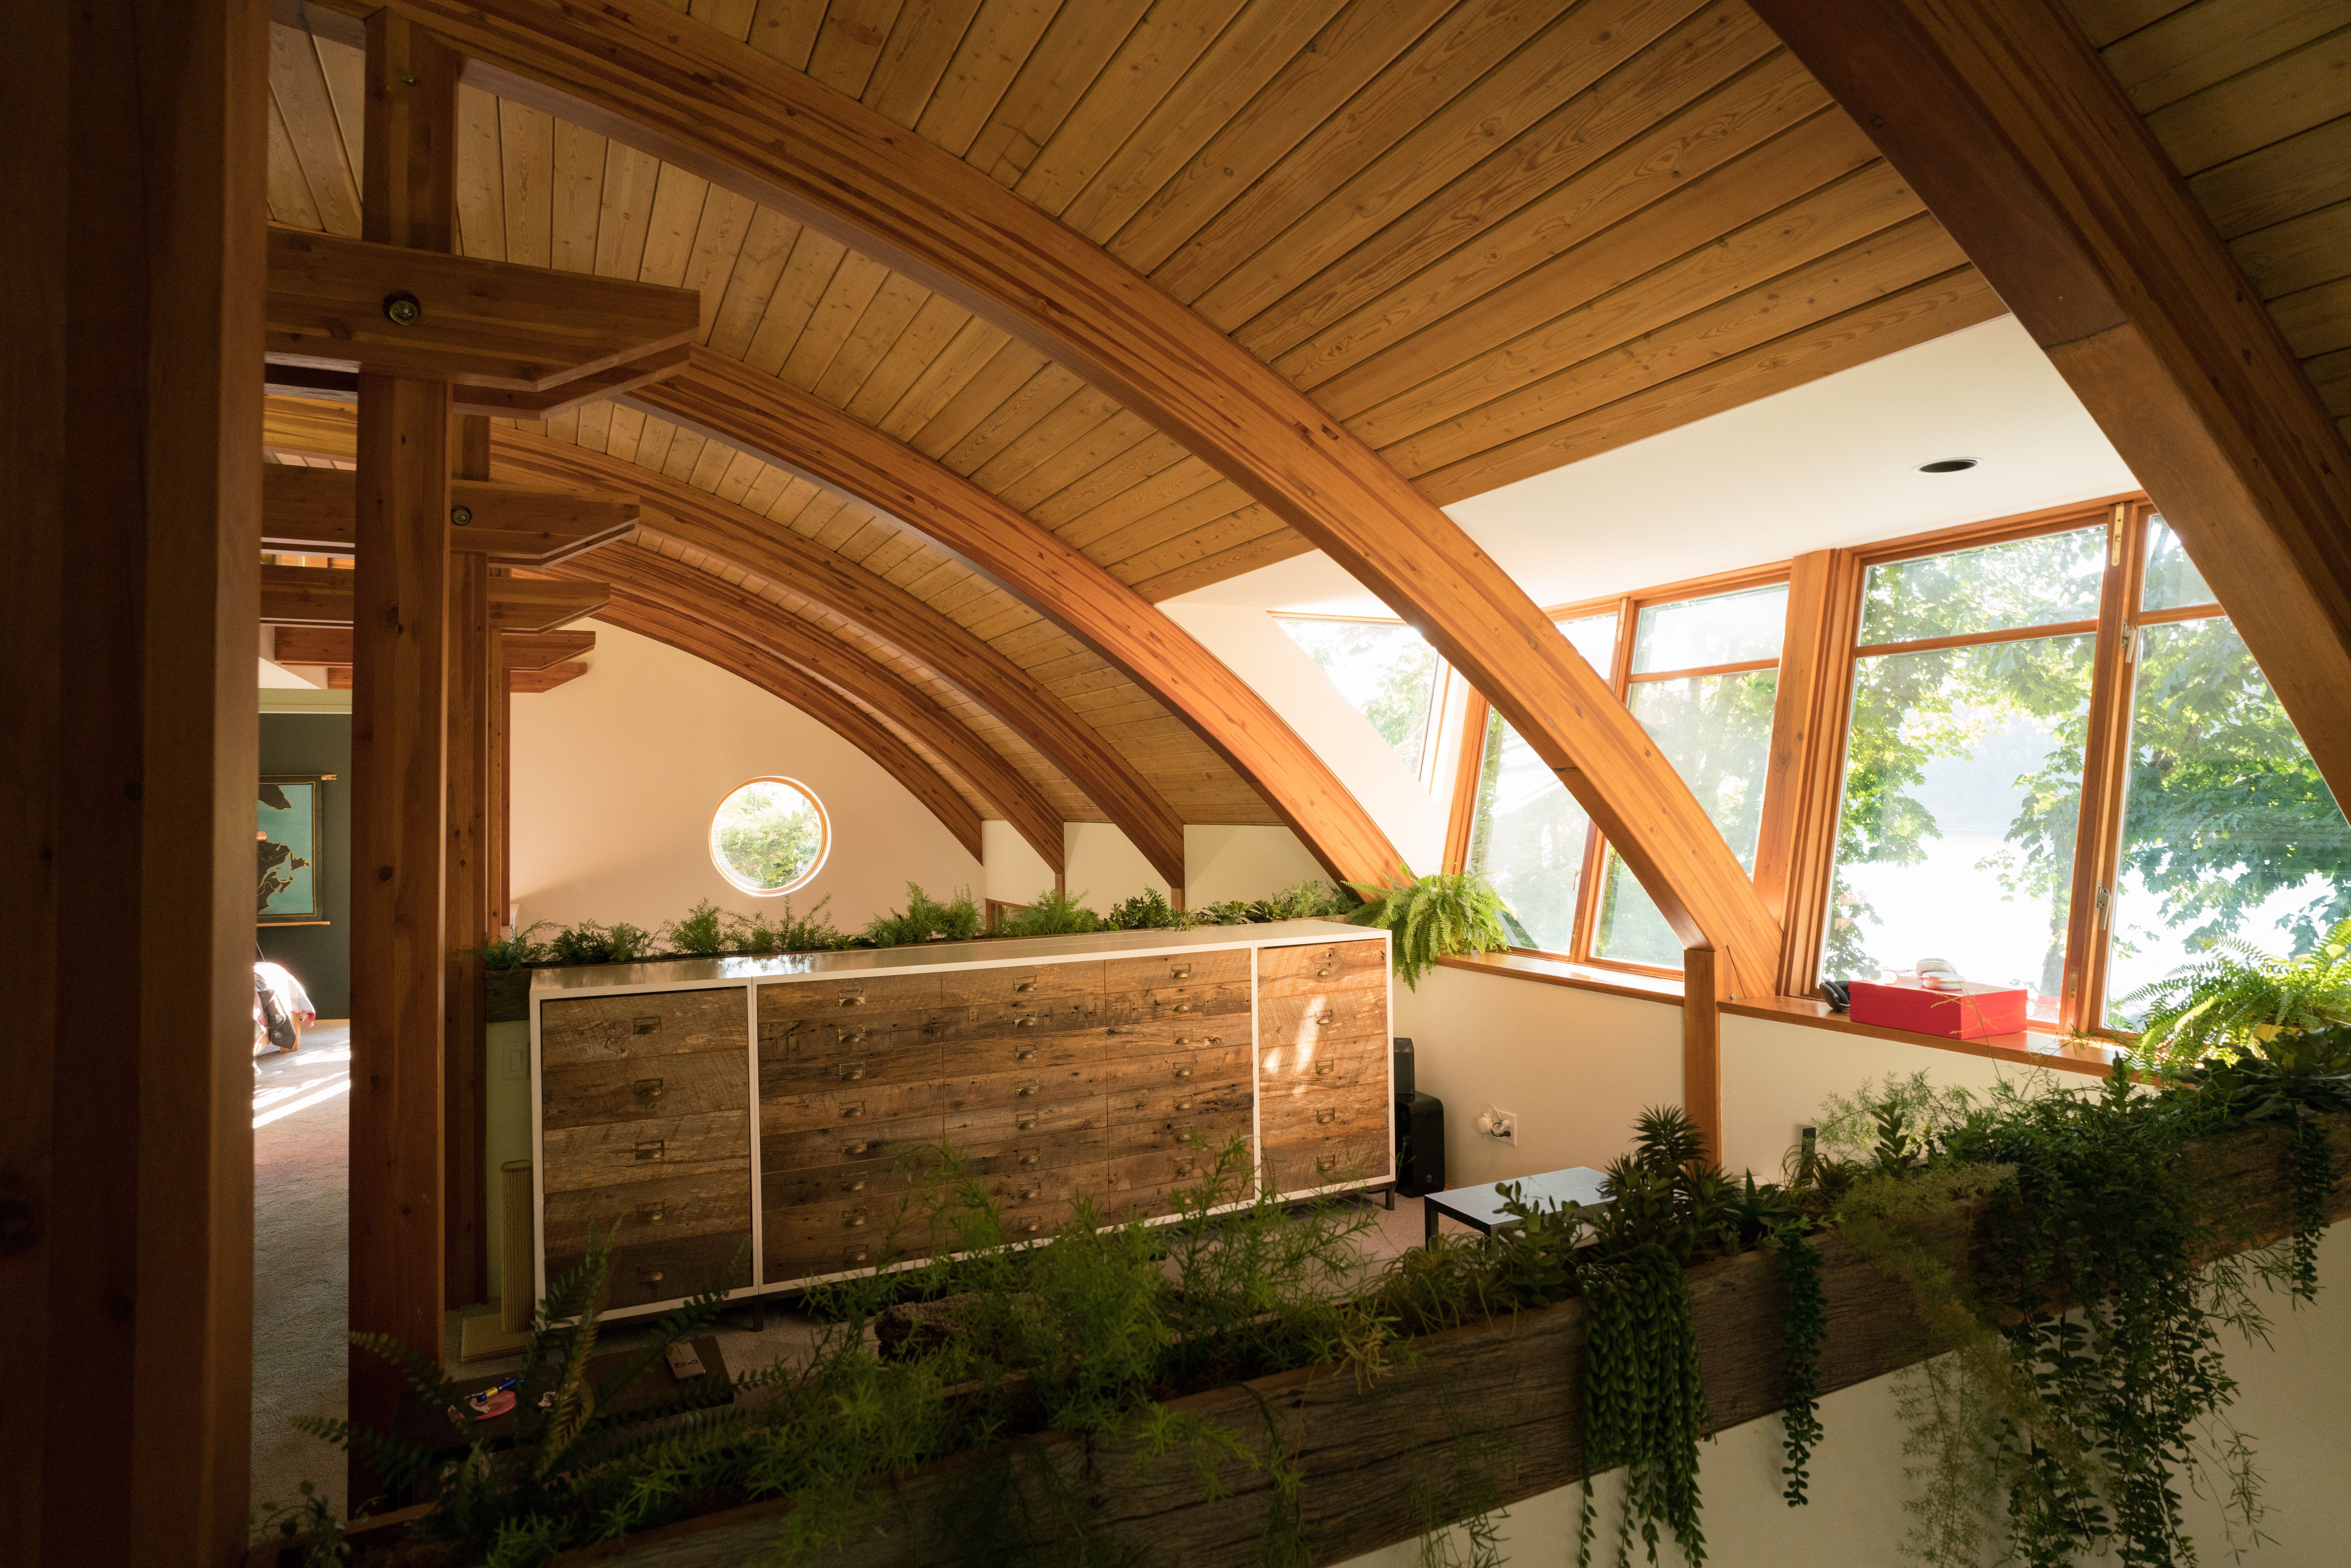 Timber frame ceiling at a custom built home on Bowen Island.